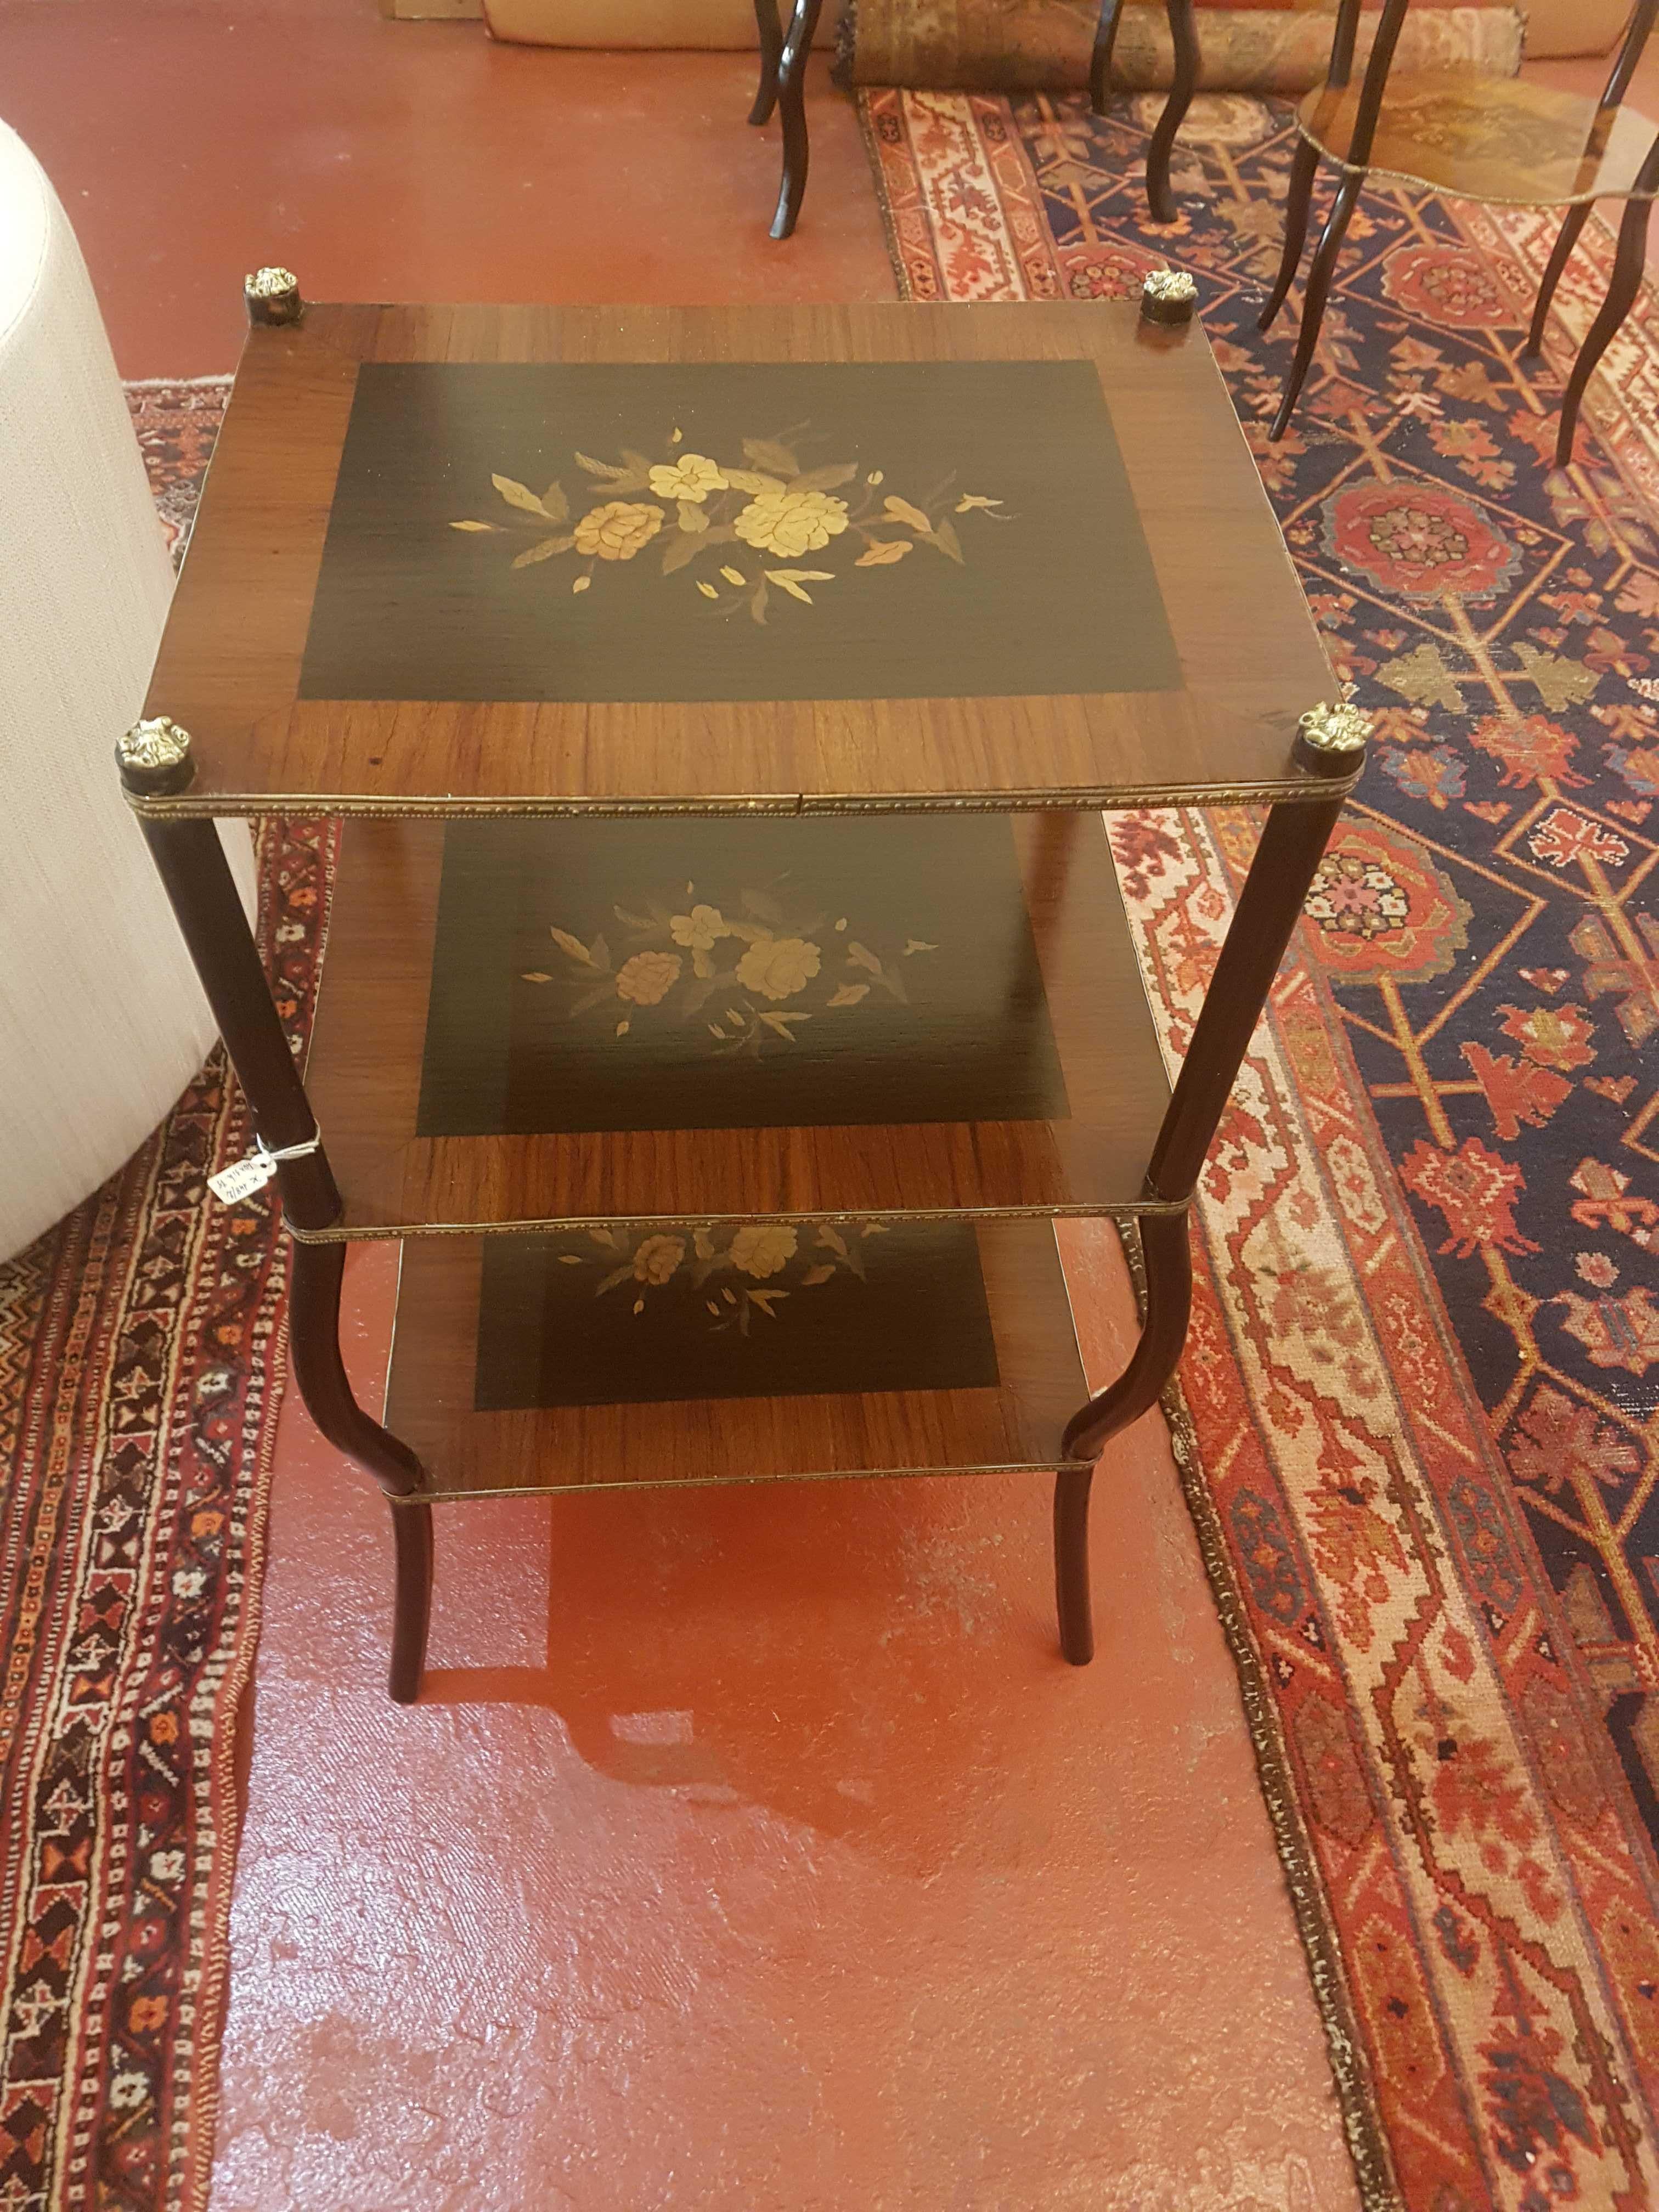 Quality antique French marquetry étagère, with lovely marquetry inlaid shaped top, two shaped under-tiers with marquetry inlay, standing on four ebonized legs.
   